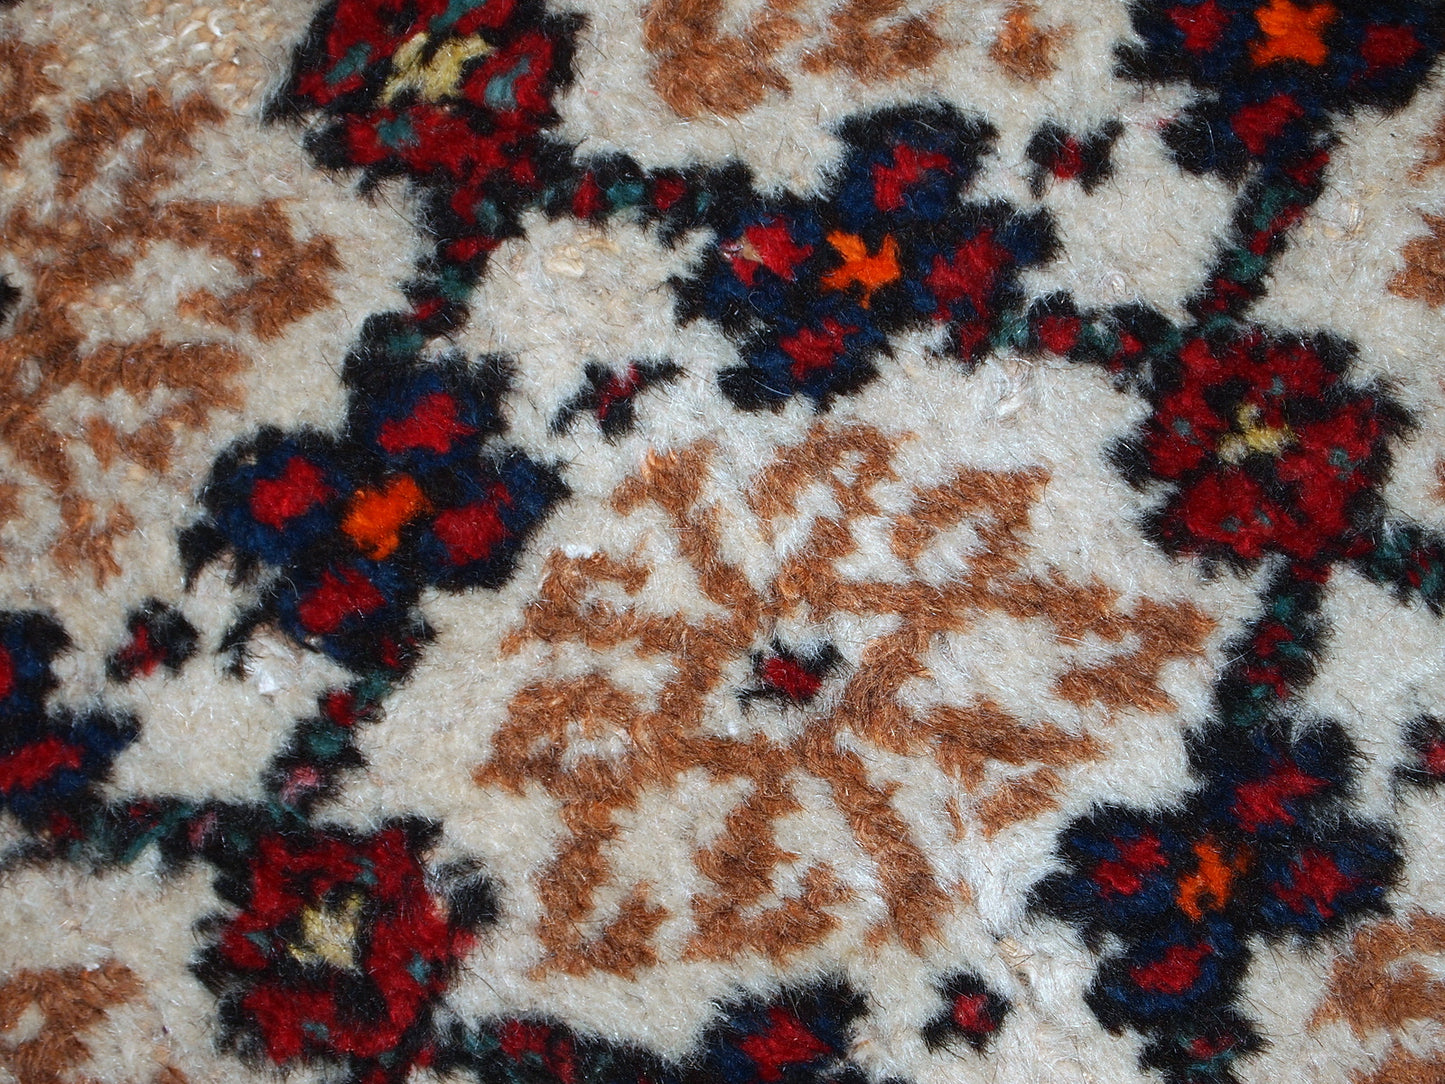 Antique Hamadan runner in good original condition. The rug is in white, red and blue shades.